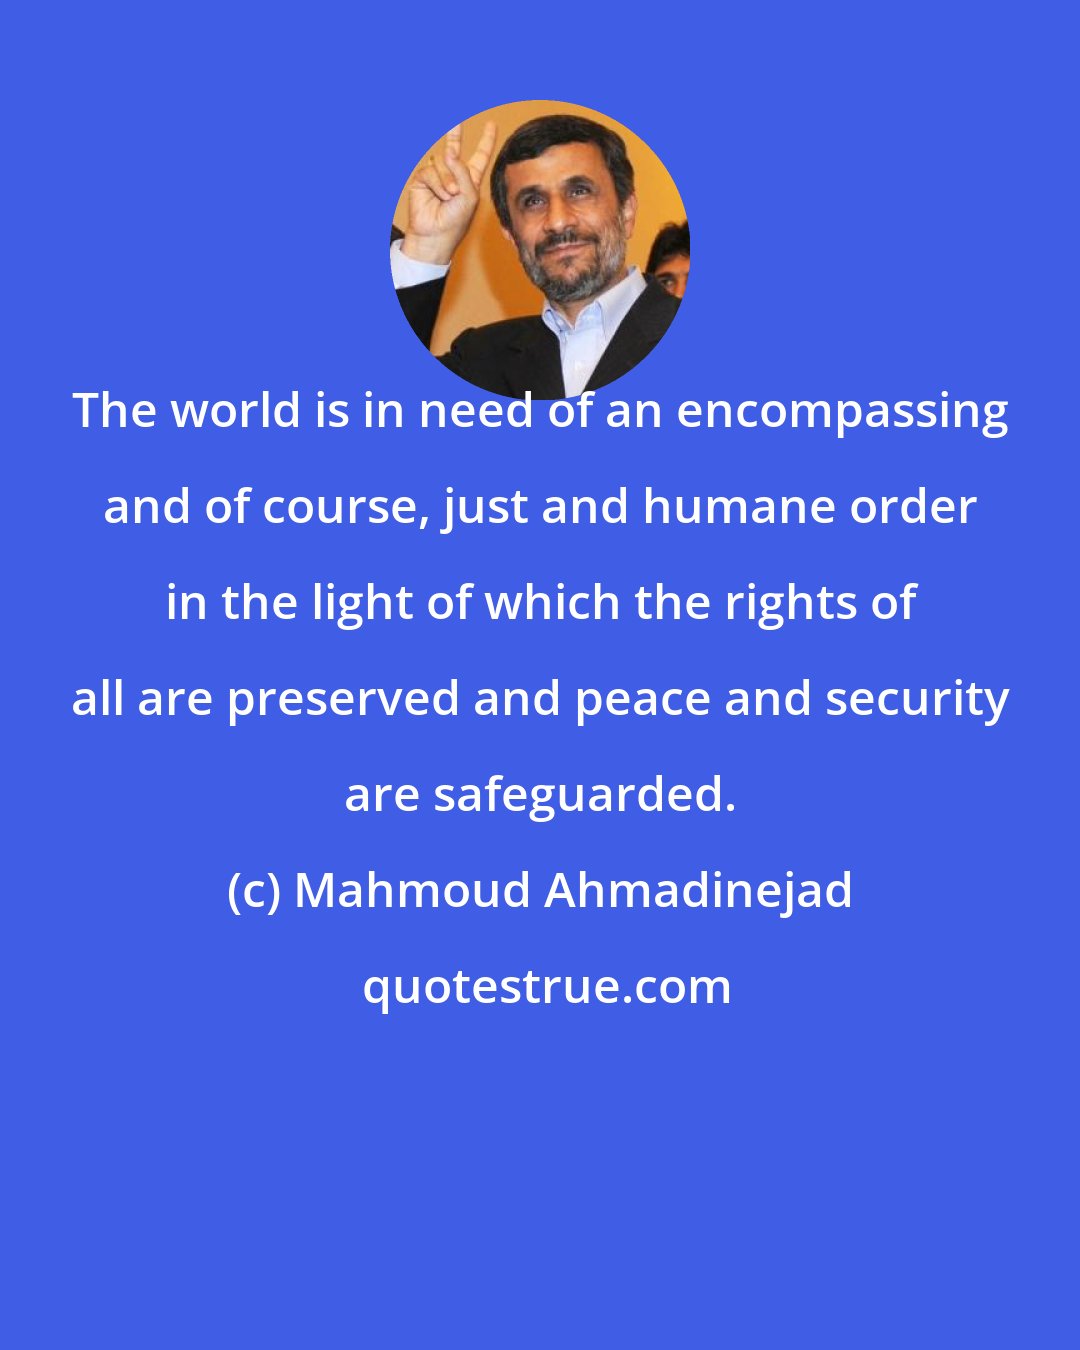 Mahmoud Ahmadinejad: The world is in need of an encompassing and of course, just and humane order in the light of which the rights of all are preserved and peace and security are safeguarded.